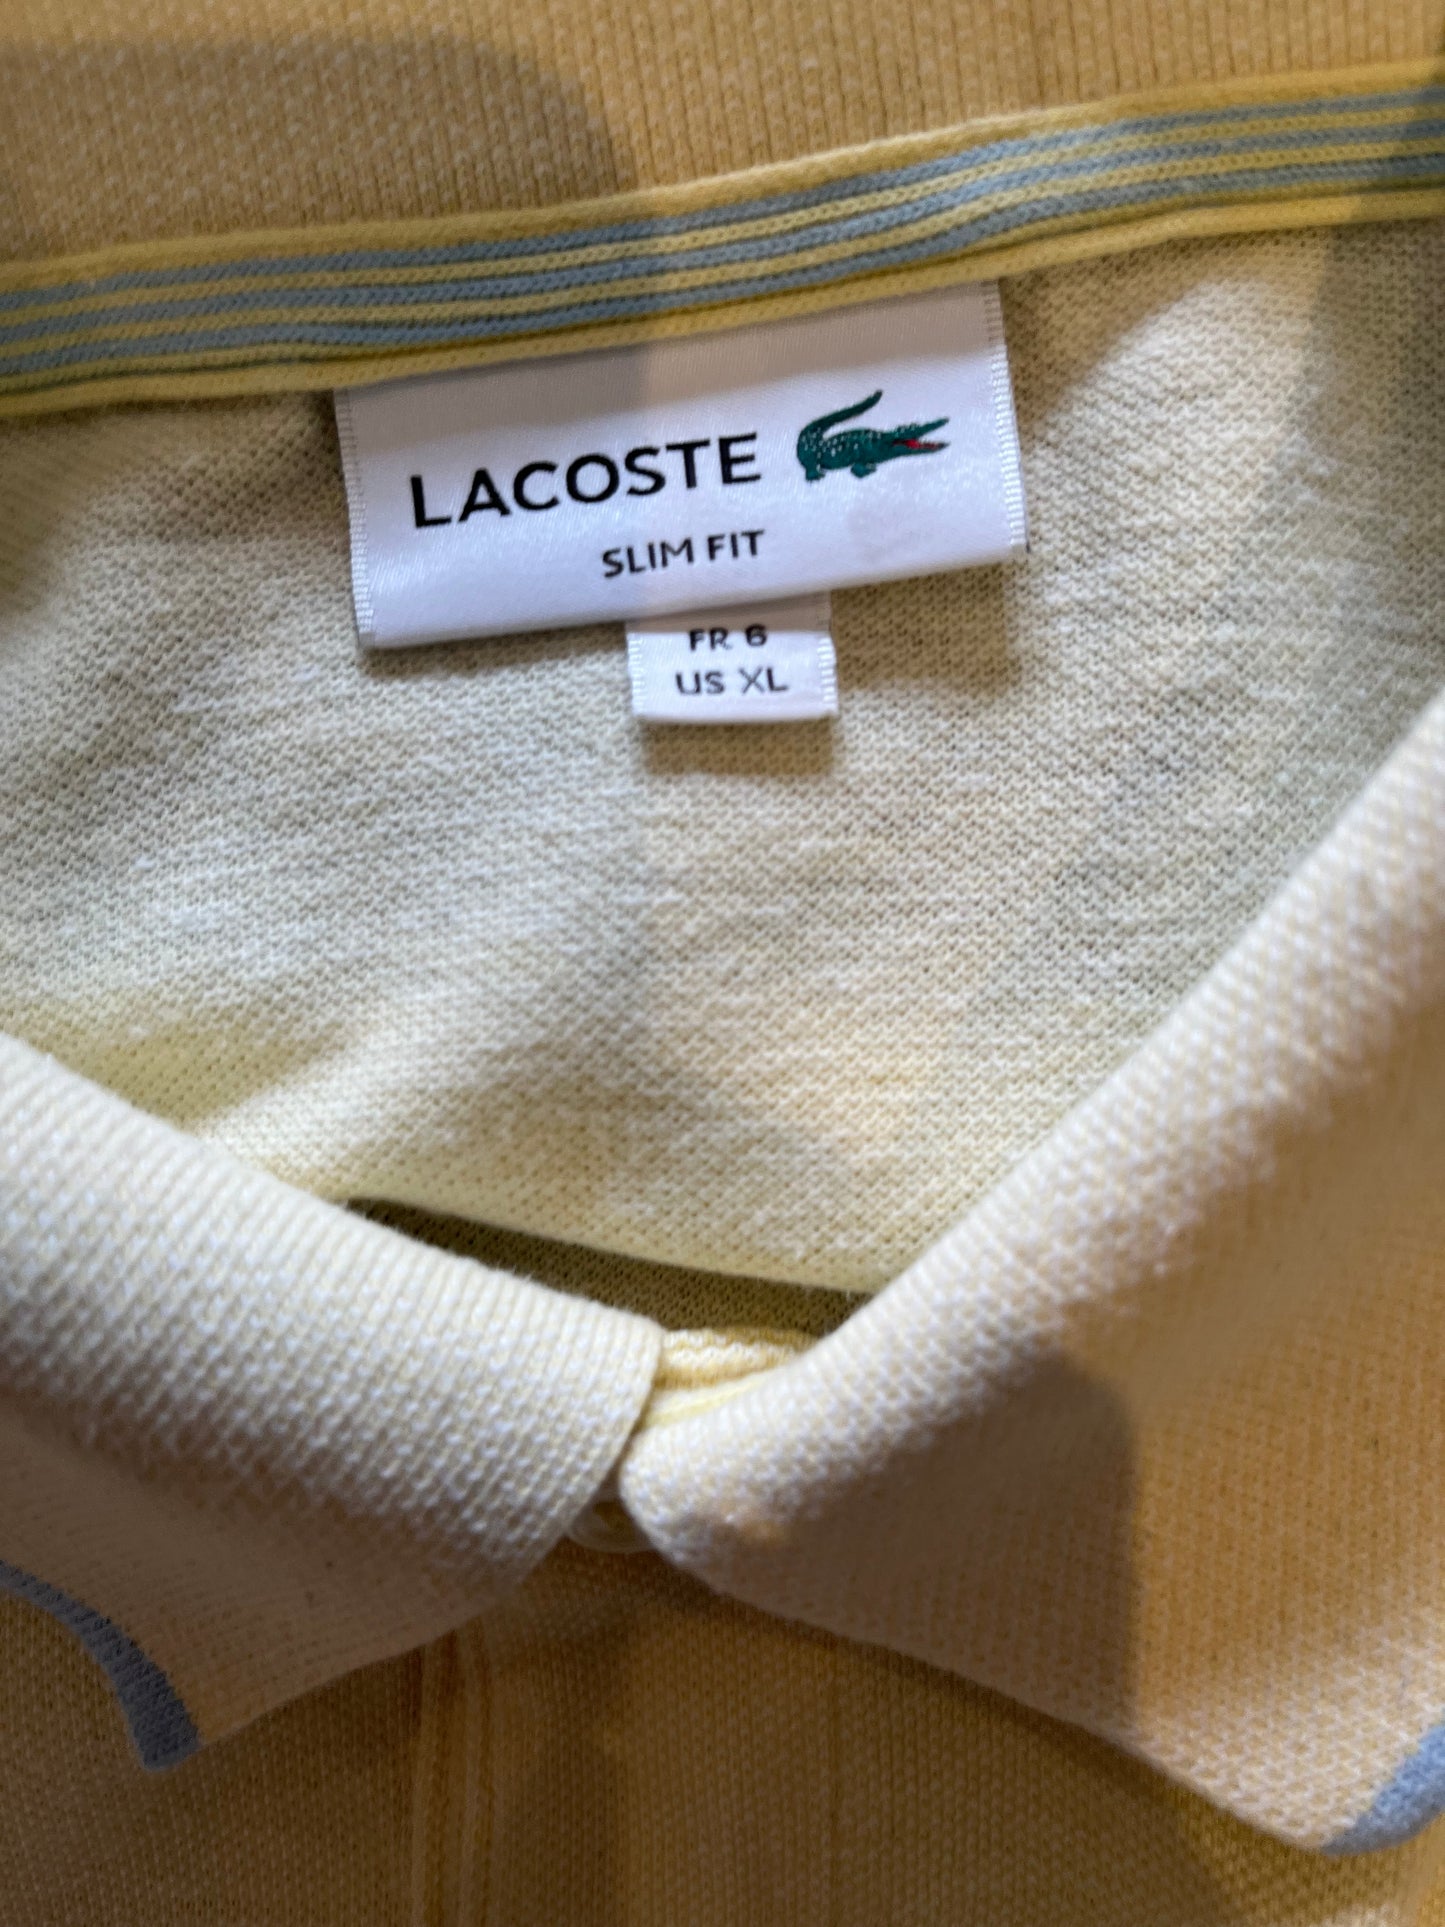 Lacoste 100% Cotton Yellow Polo Shirt Size 6 XL Fits Large to XL